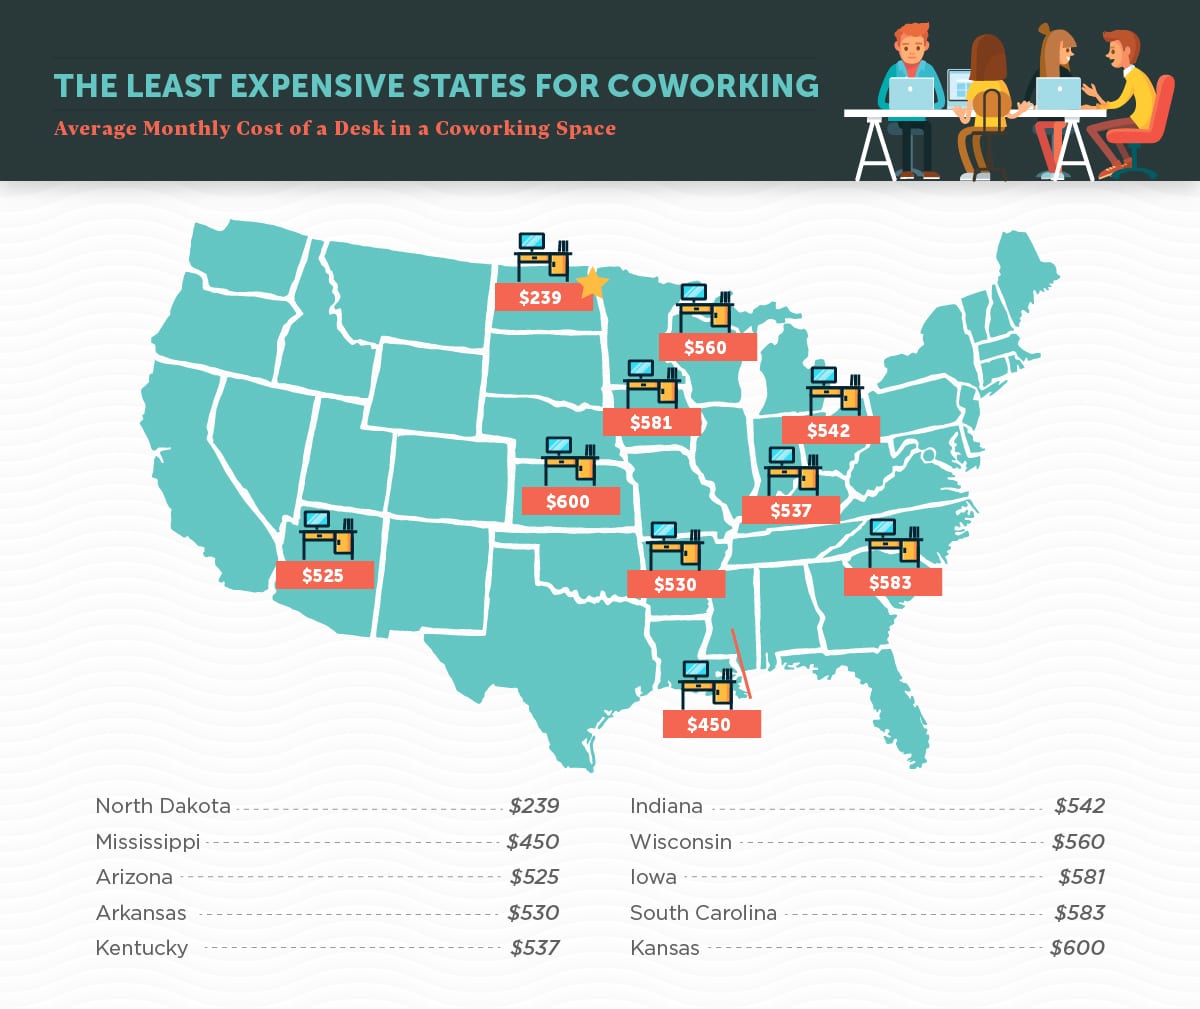 The least expensive states for coworking.